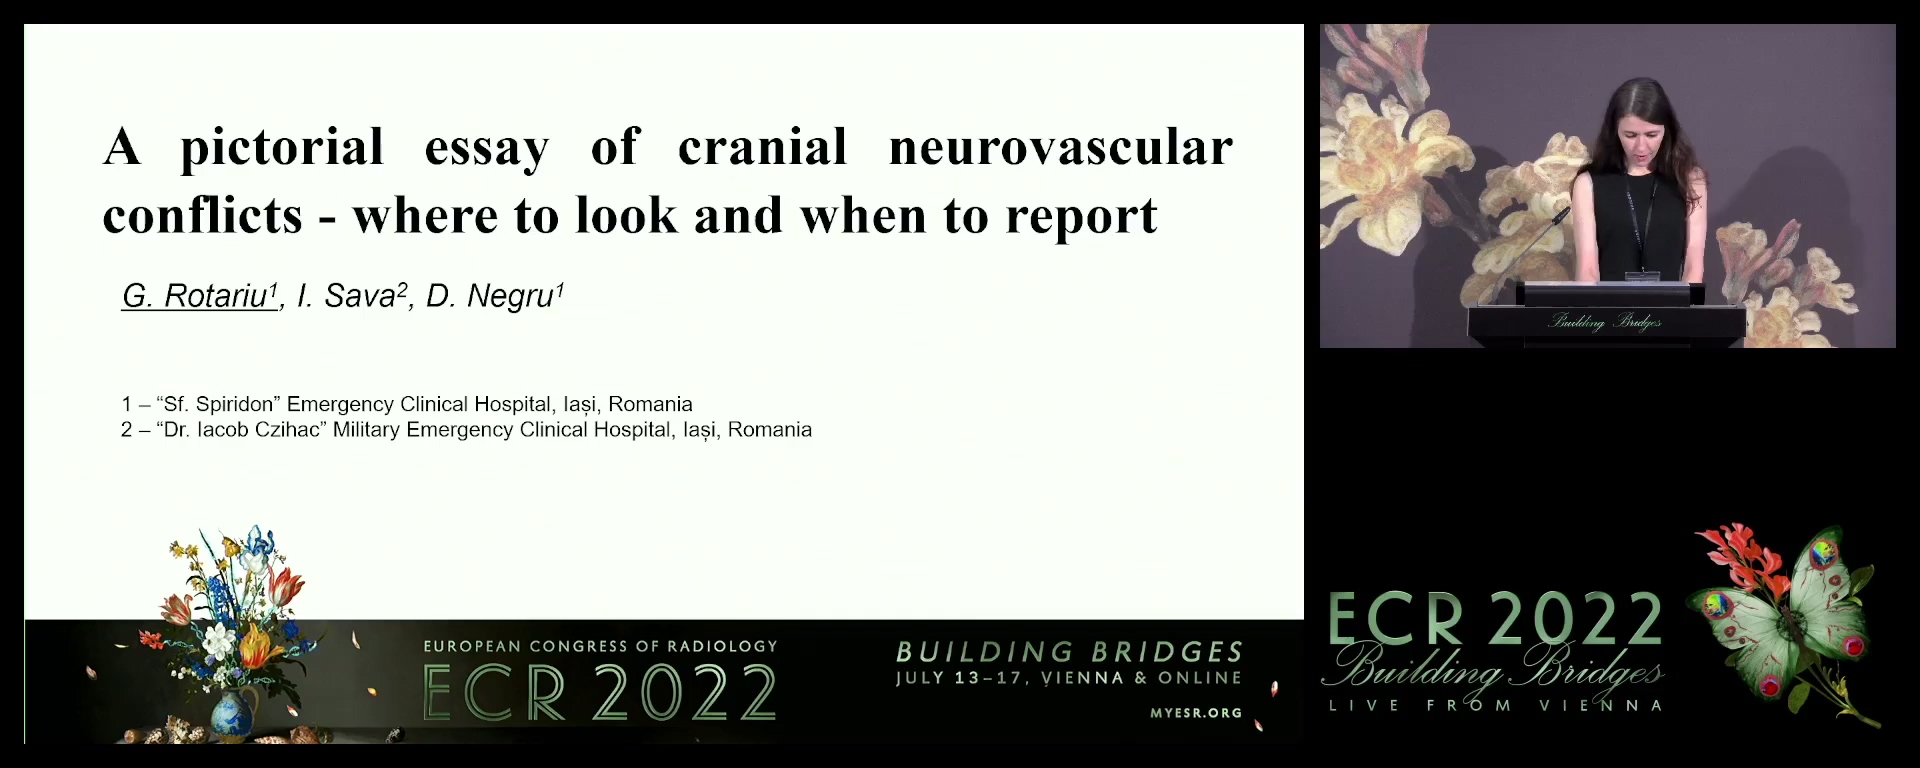 A pictorial essay of cranial neurovascular conflicts: where to look and when to report